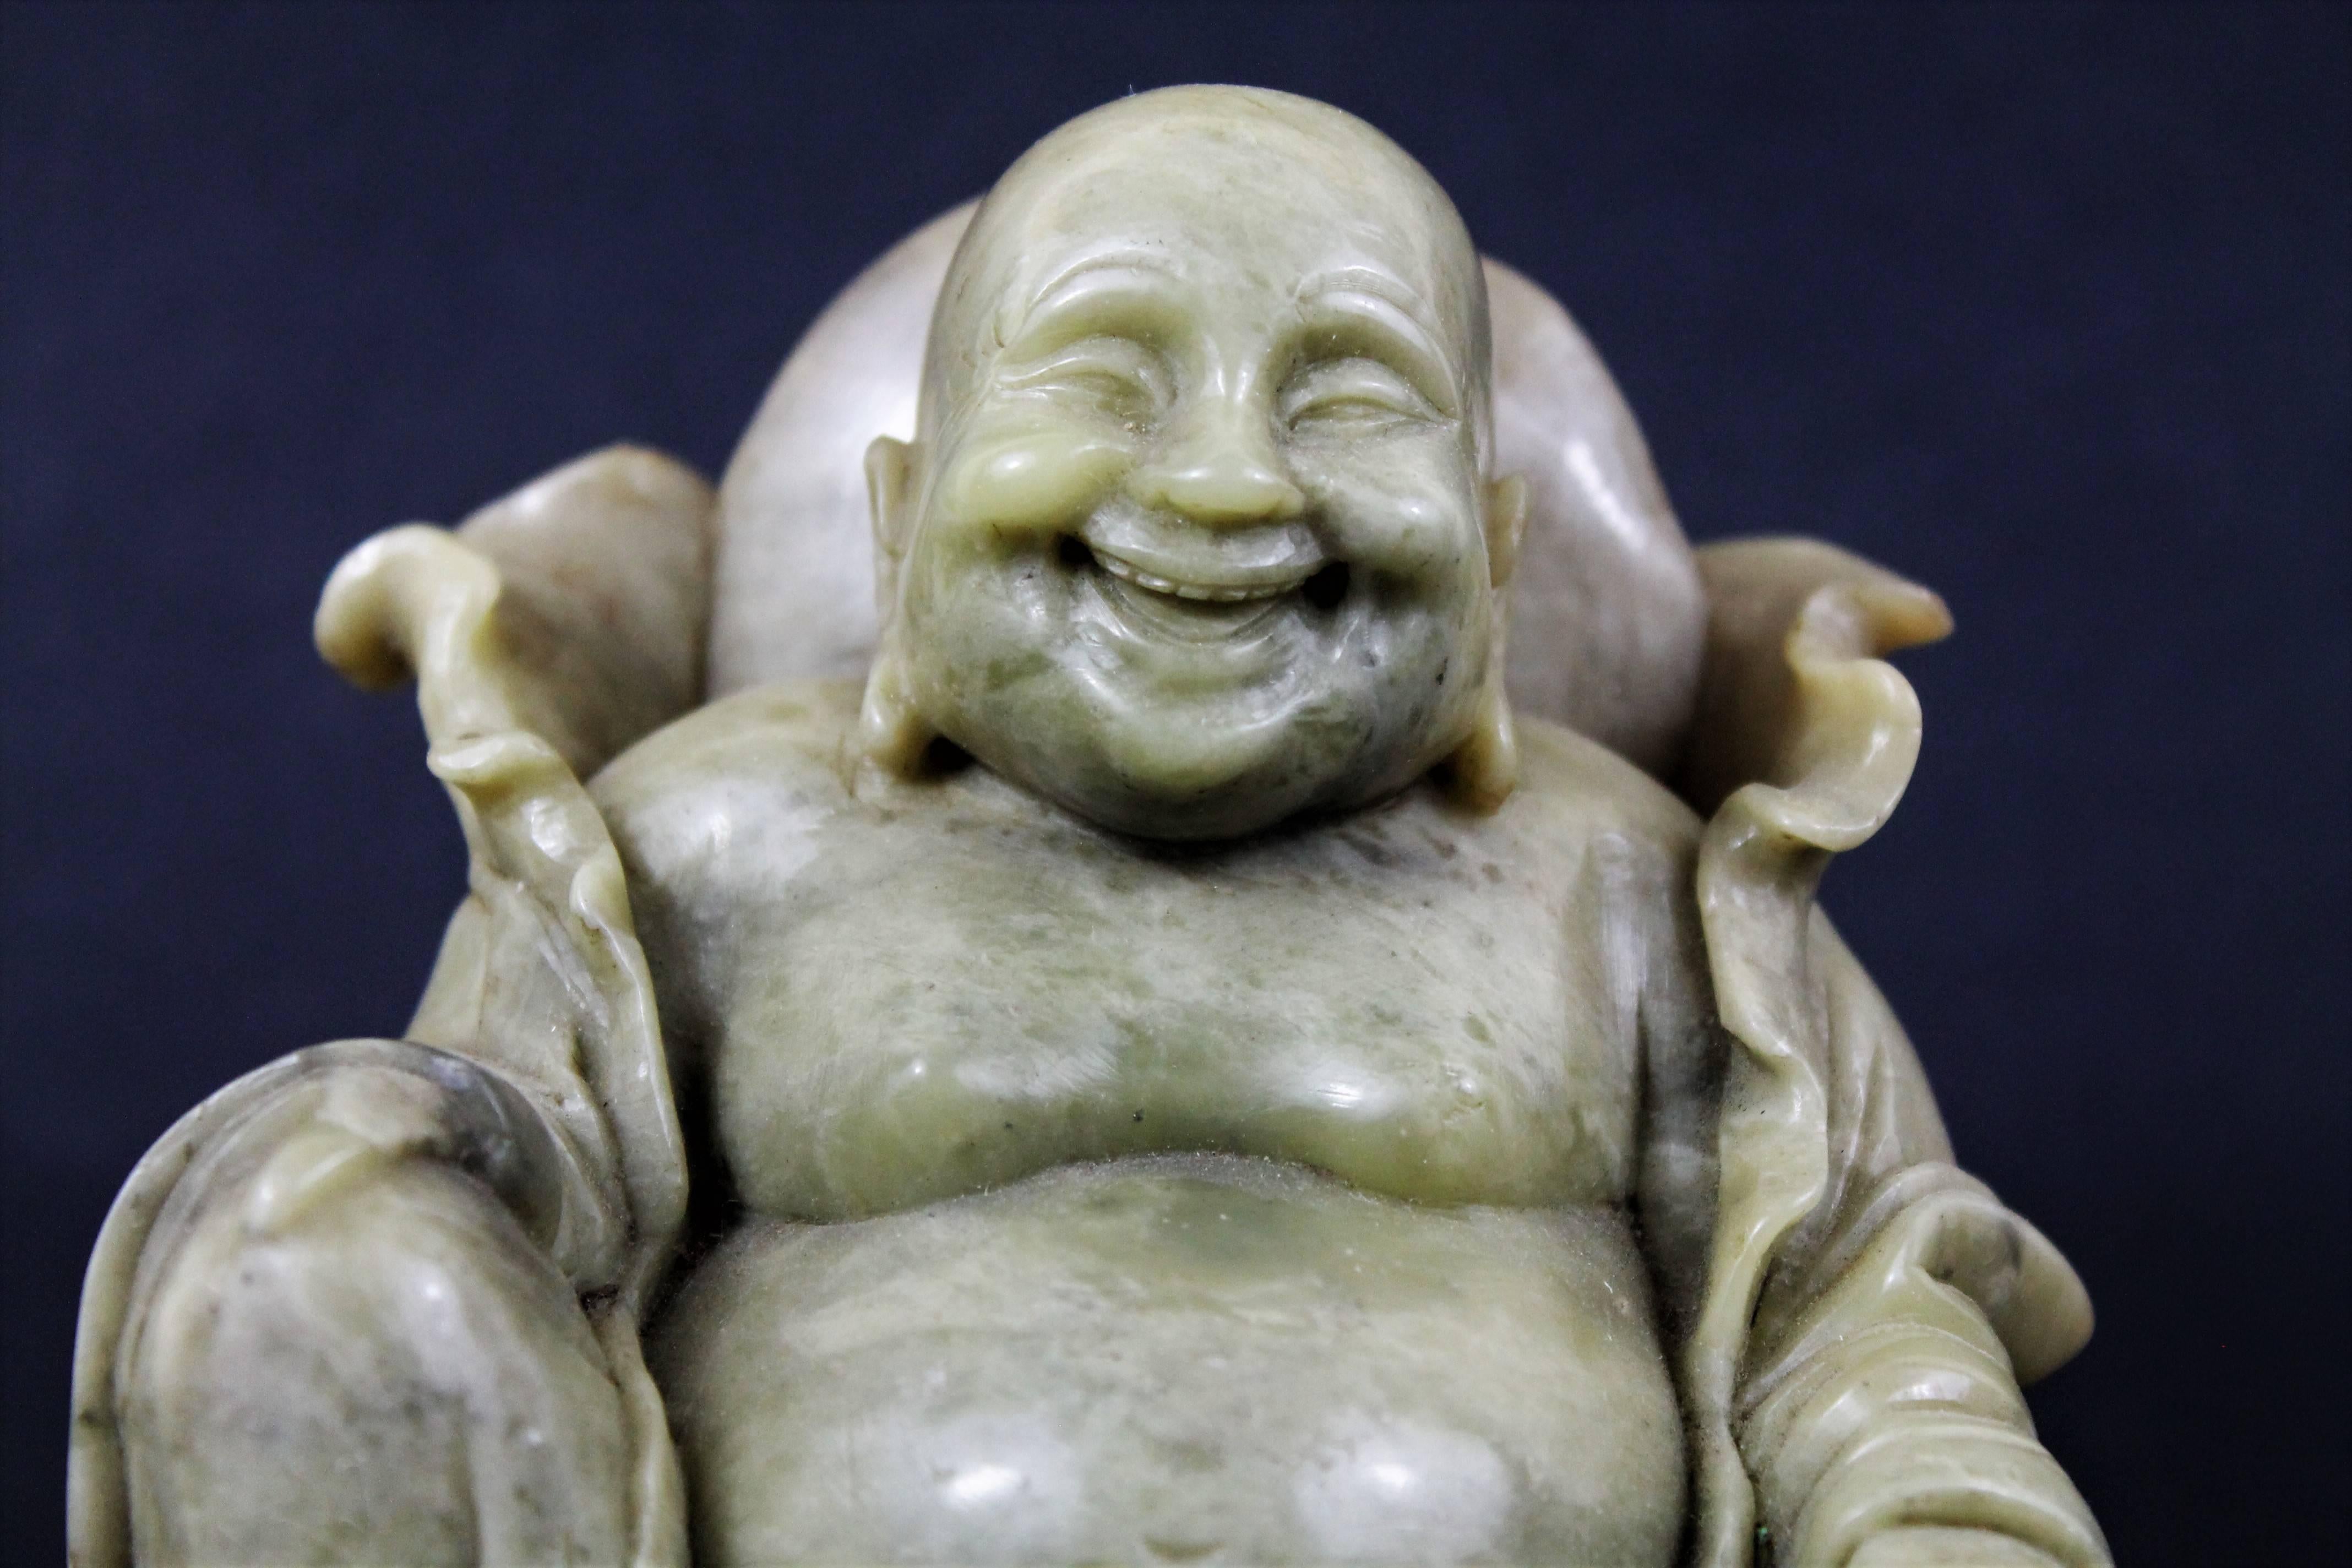 Nice soapstone sculpture representing sitting Budai, the face is finely carved. Very good quality of execution
The laughing Buddha or Budai is the he god of contentment and happiness, guardian of children, and patron of bartenders. Budai has a